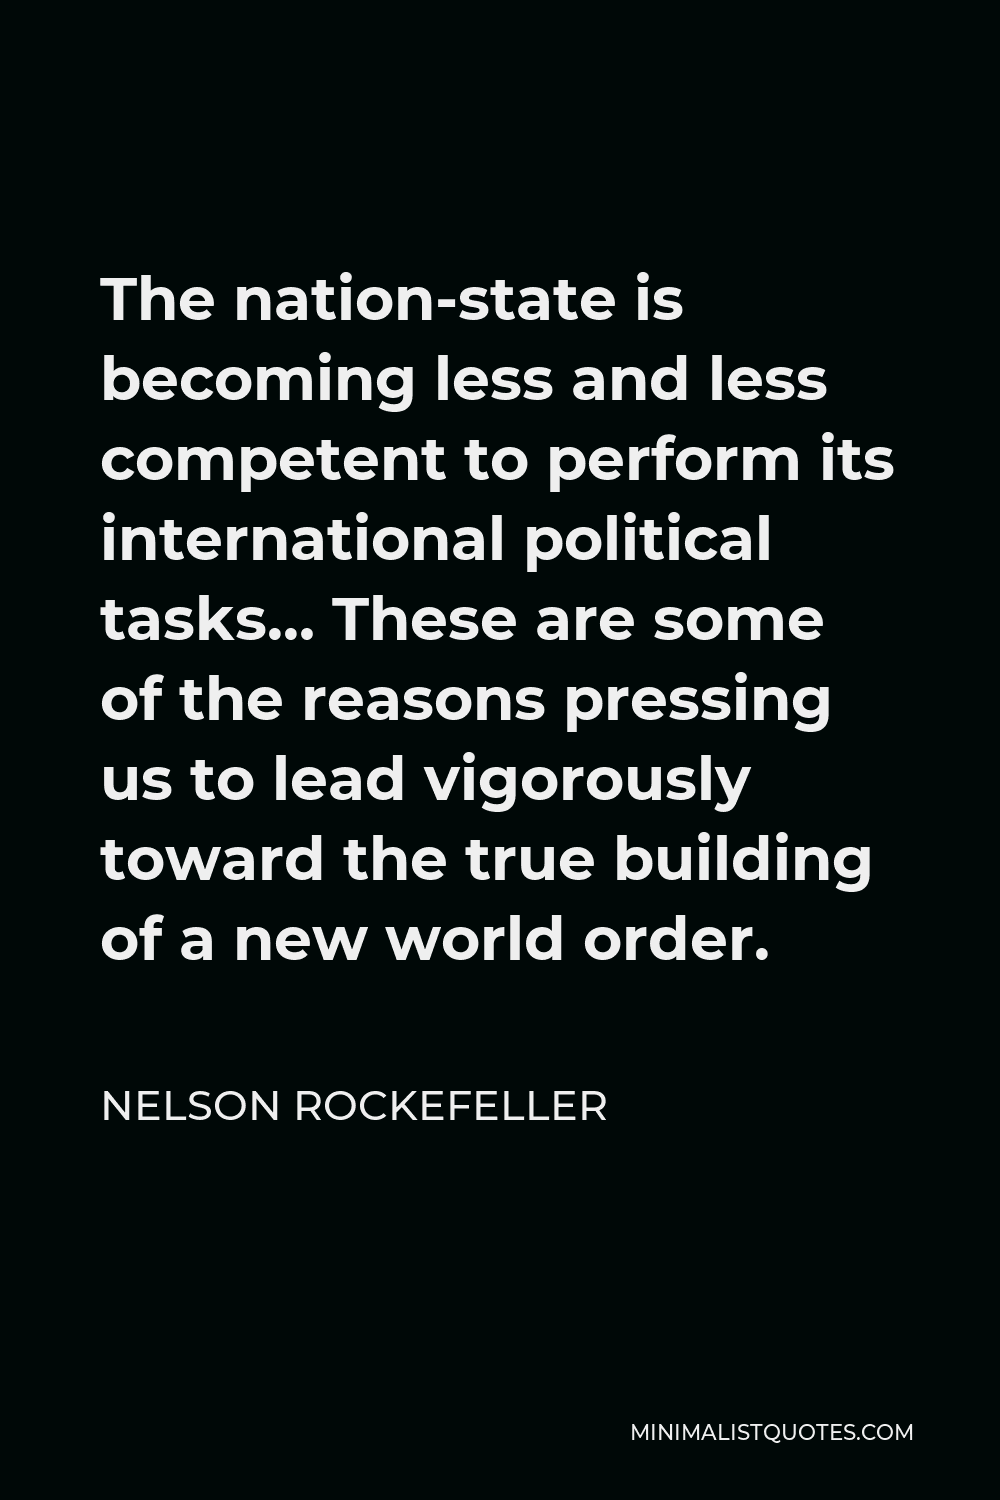 Nelson Rockefeller Quote - The nation-state is becoming less and less competent to perform its international political tasks… These are some of the reasons pressing us to lead vigorously toward the true building of a new world order.